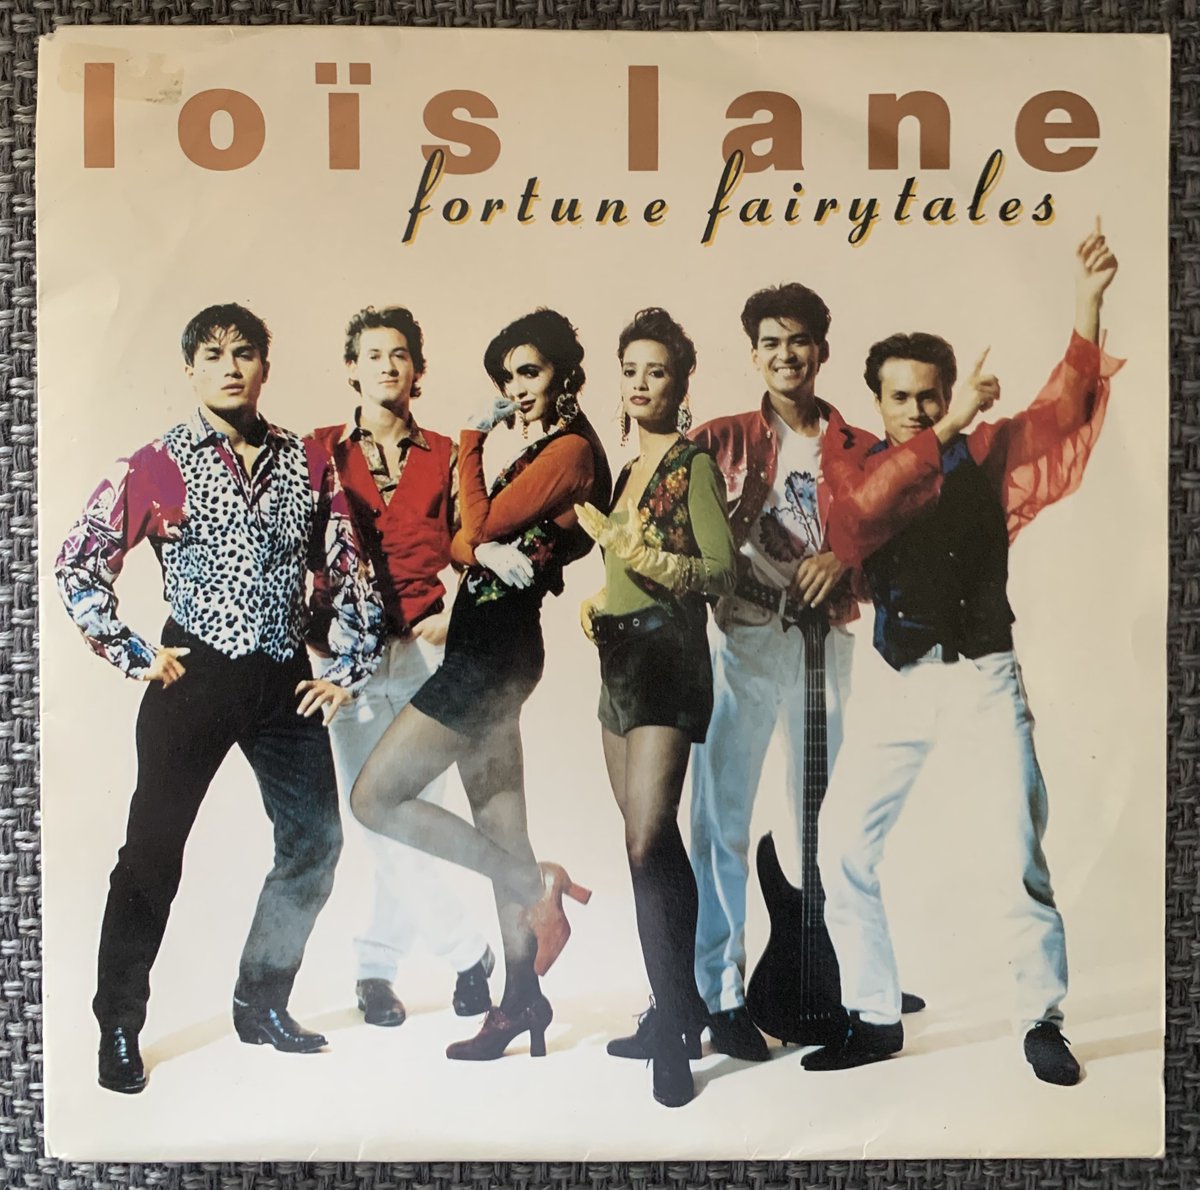 Another favourite by Dutch band Loïs Lane. This was the first single taken from the album of the same name, and was a big success here in their home country in 1990. #loislane #suzanneklemann #moniqueklemann #popjustice #retro #90s #pop #popmusic #singlescollection #treasurechest